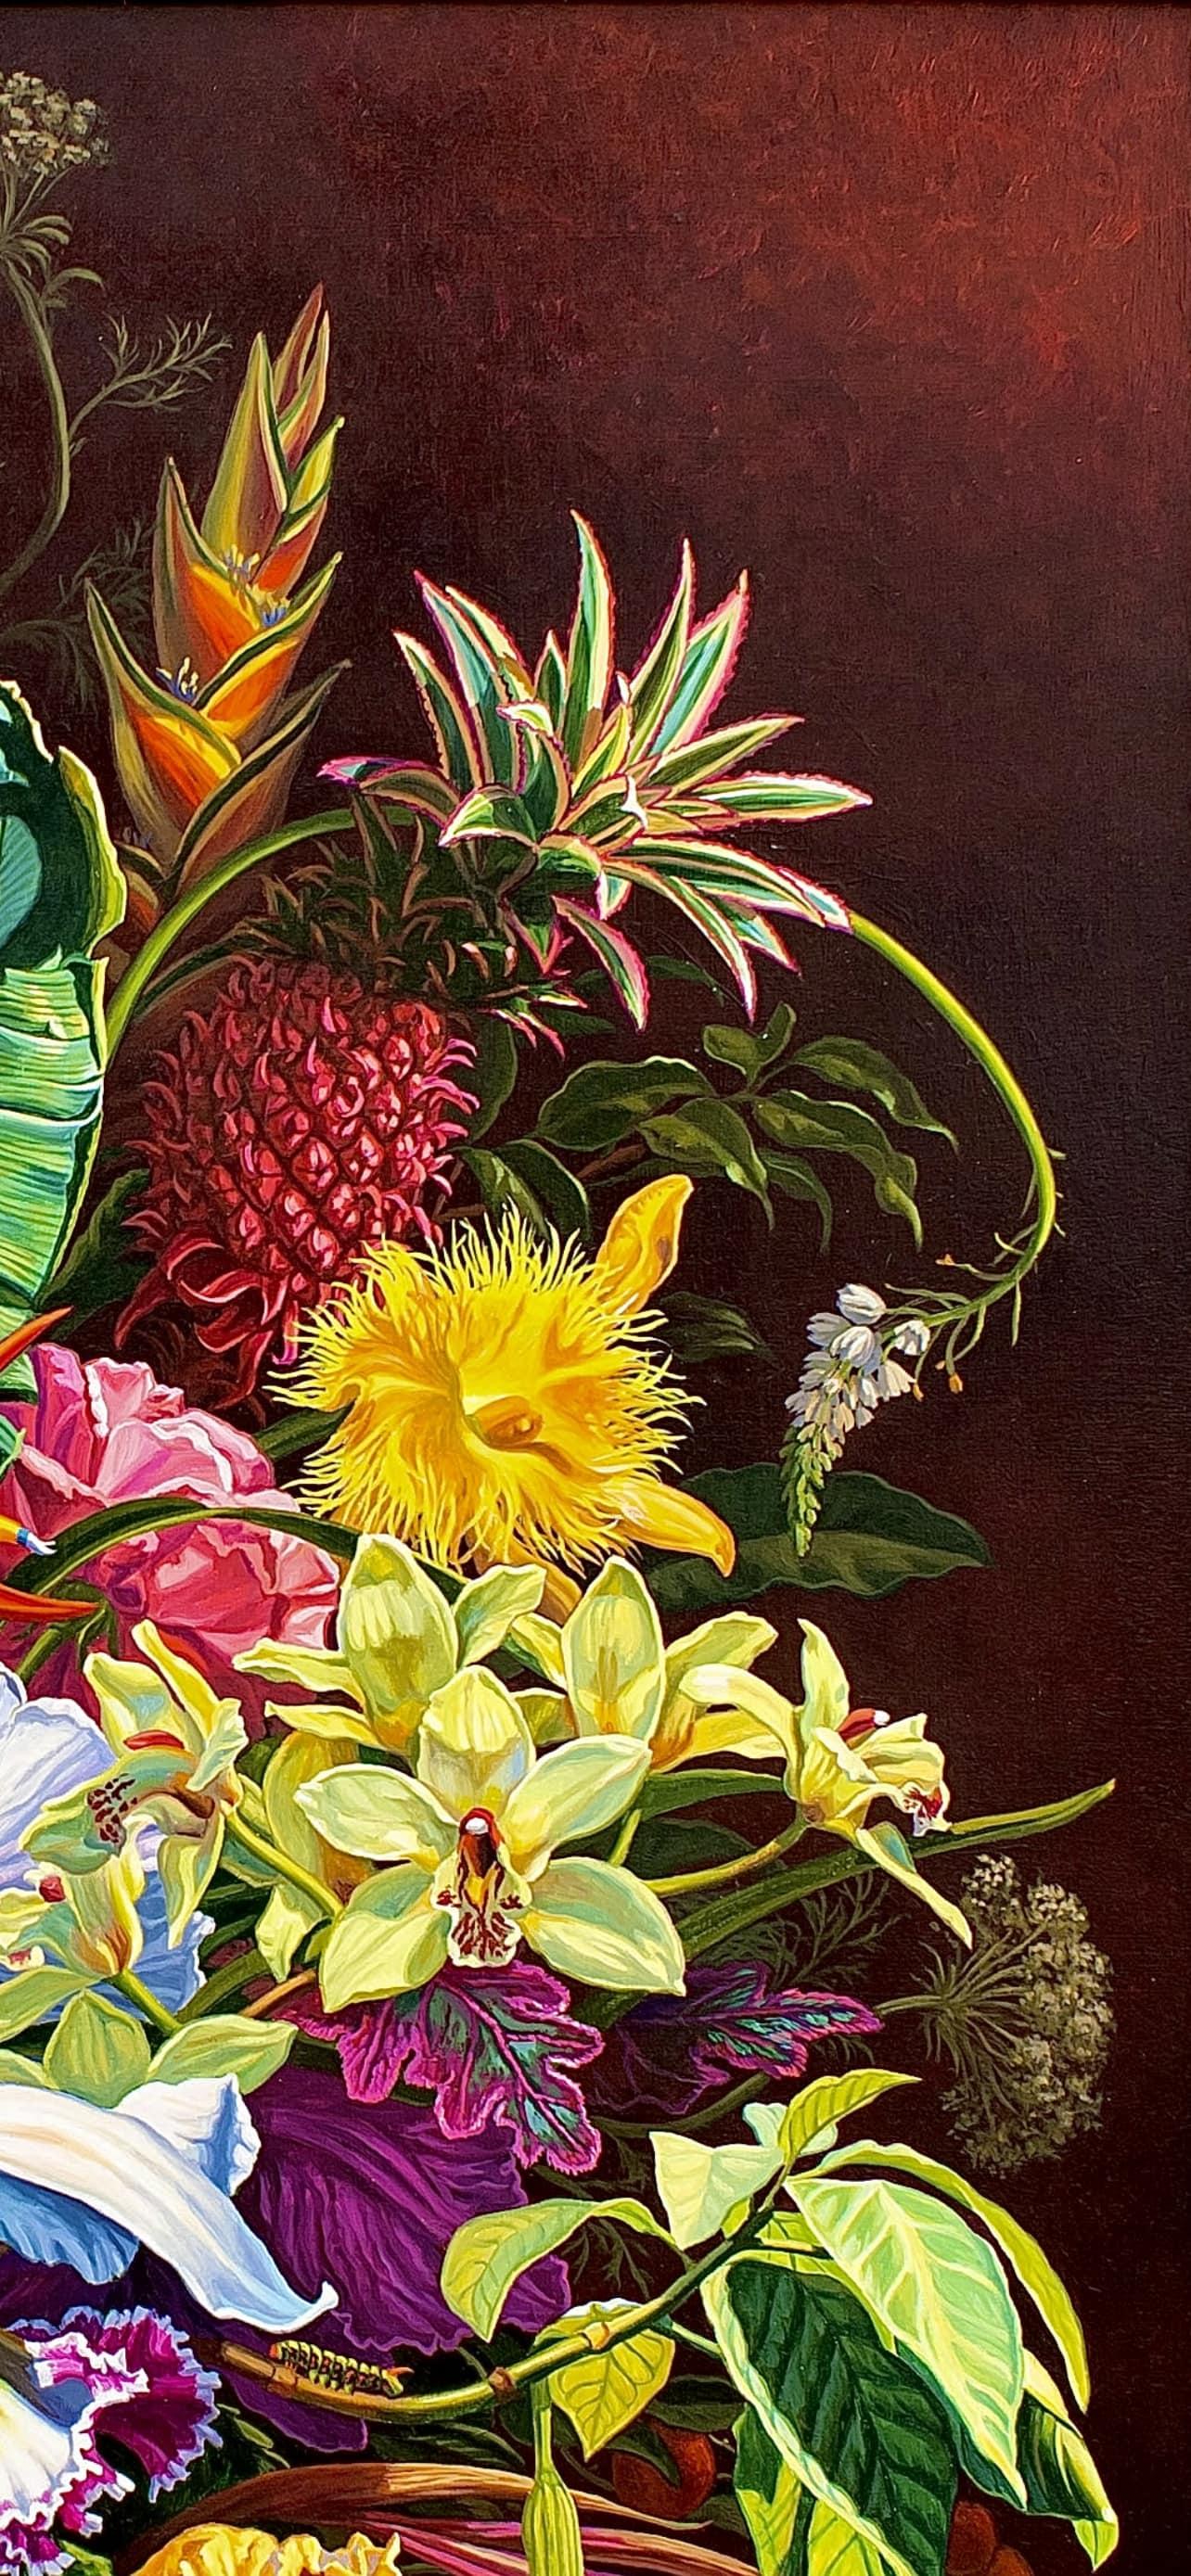 Bouquet of Tropical Flowers and Foliage - Photorealist Painting by Ian Hornak